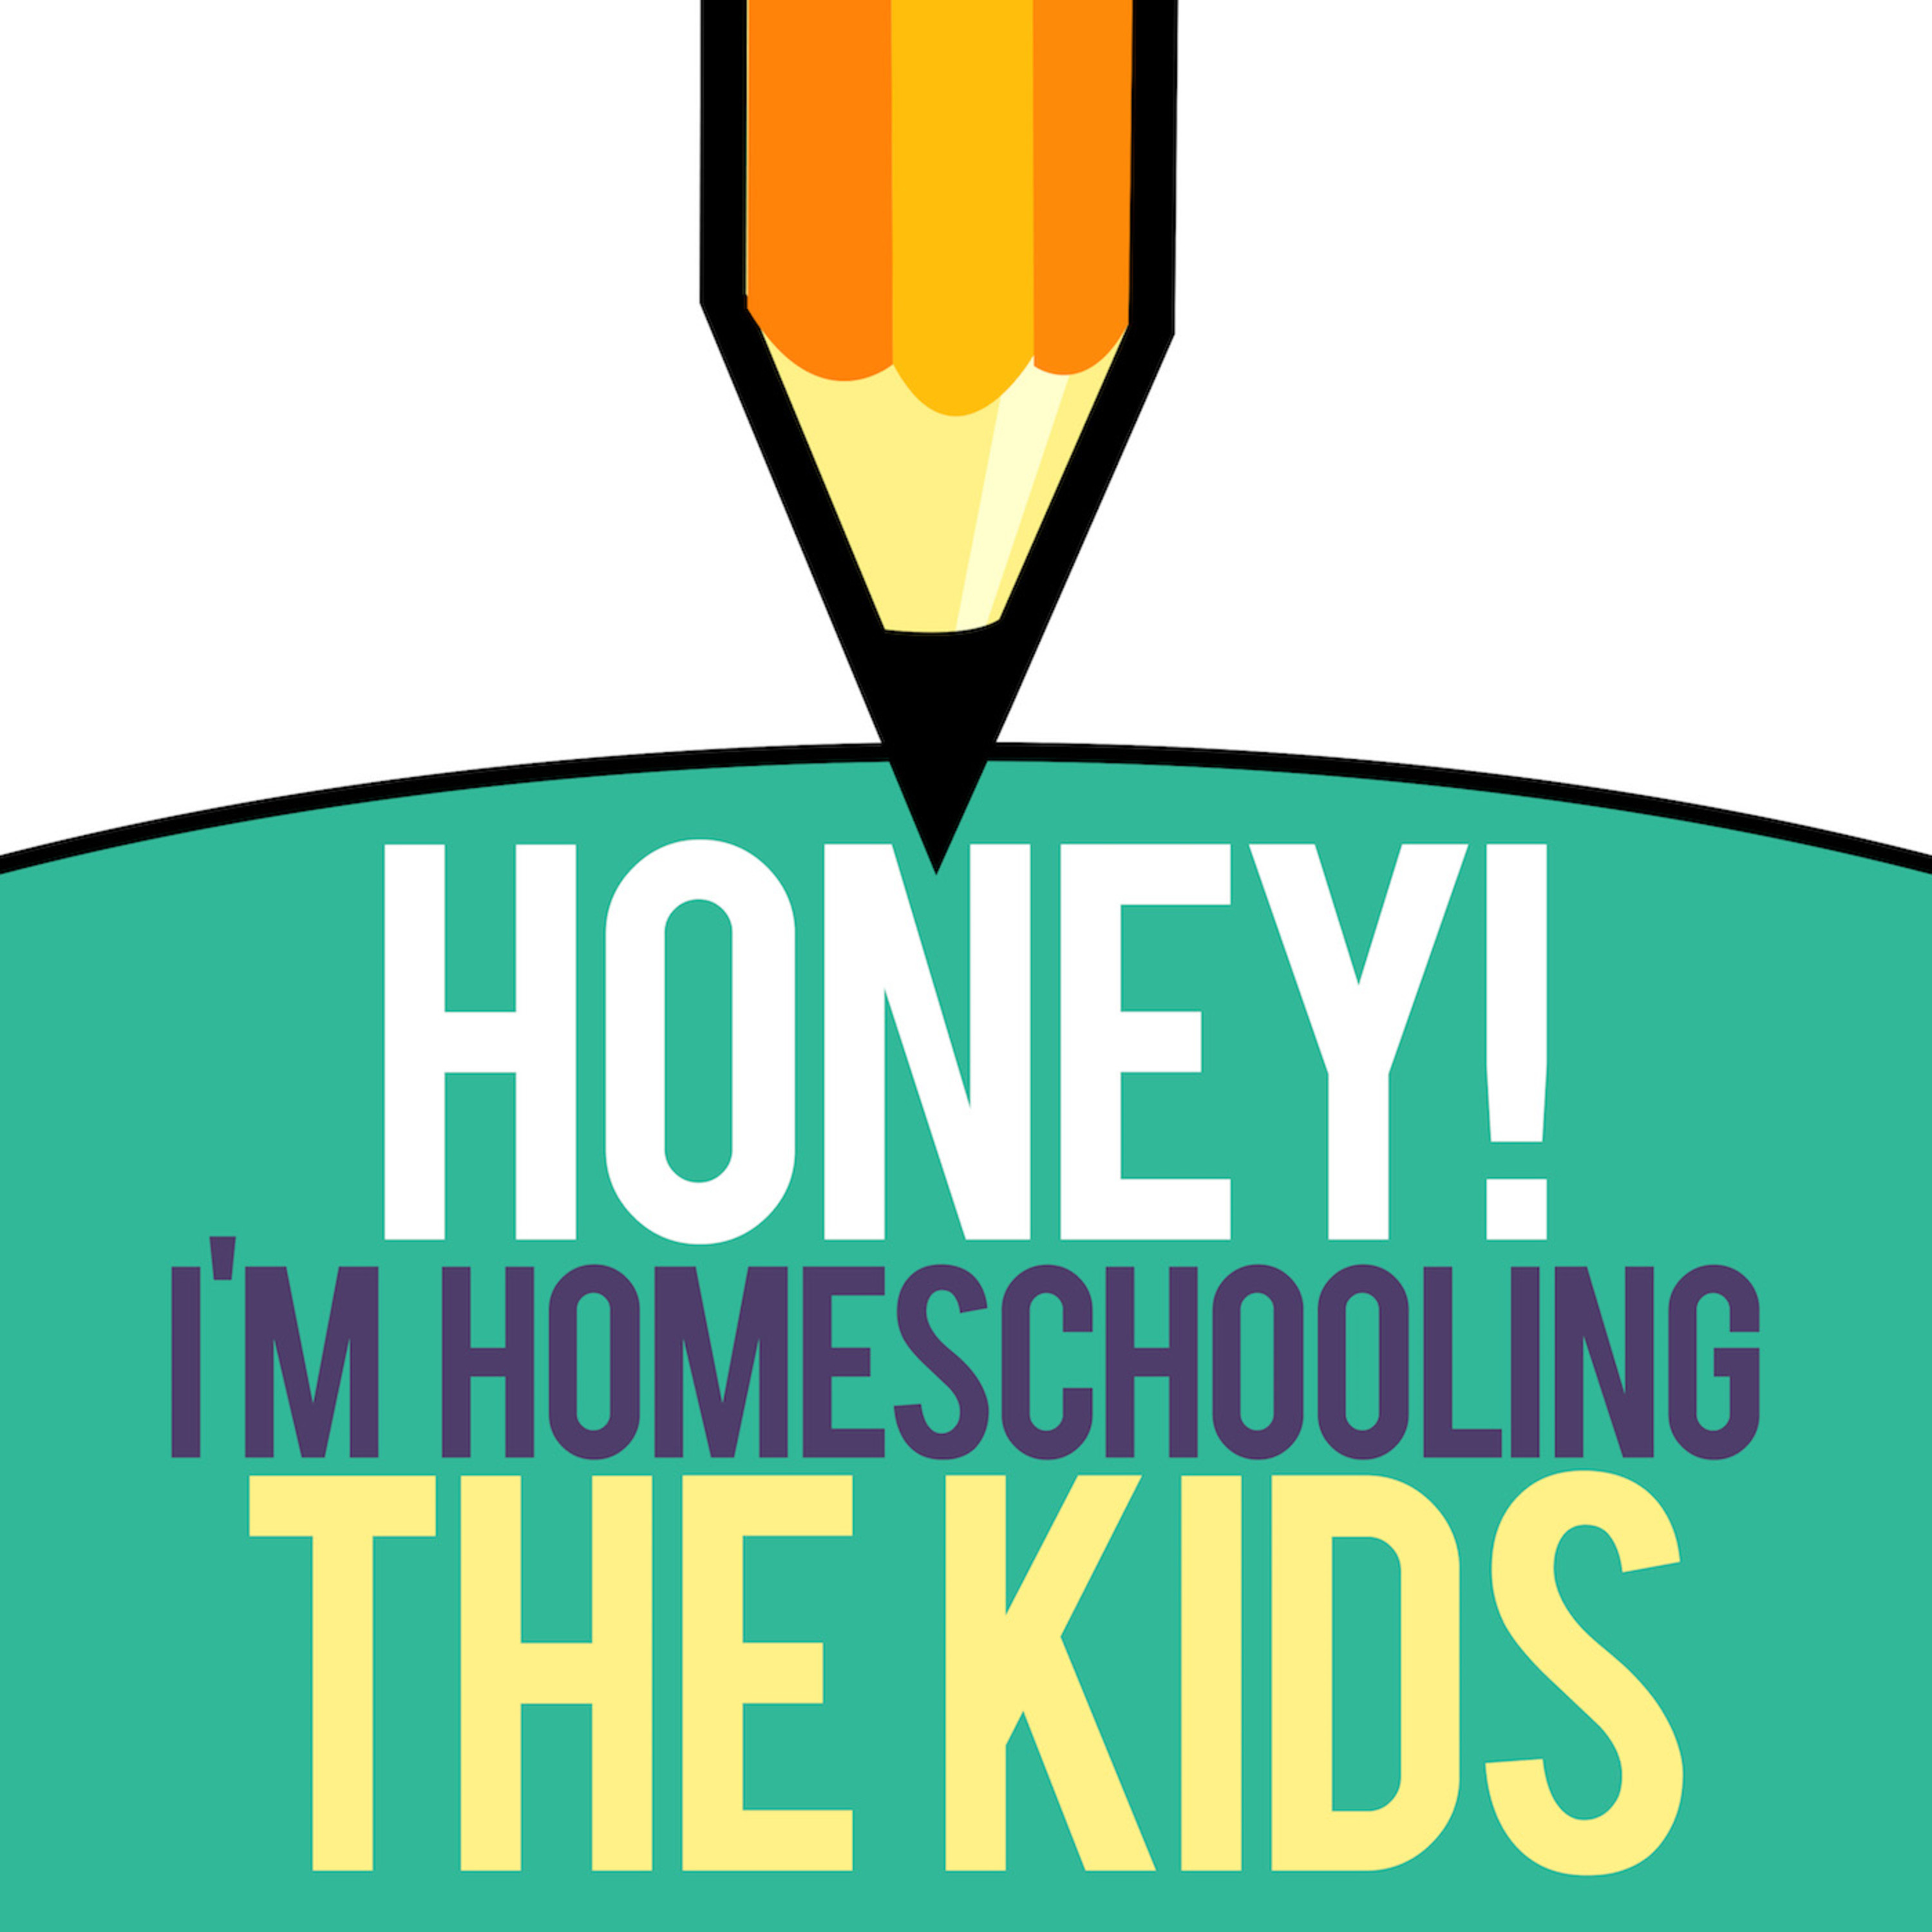 Reflections For The Homeschooling Year